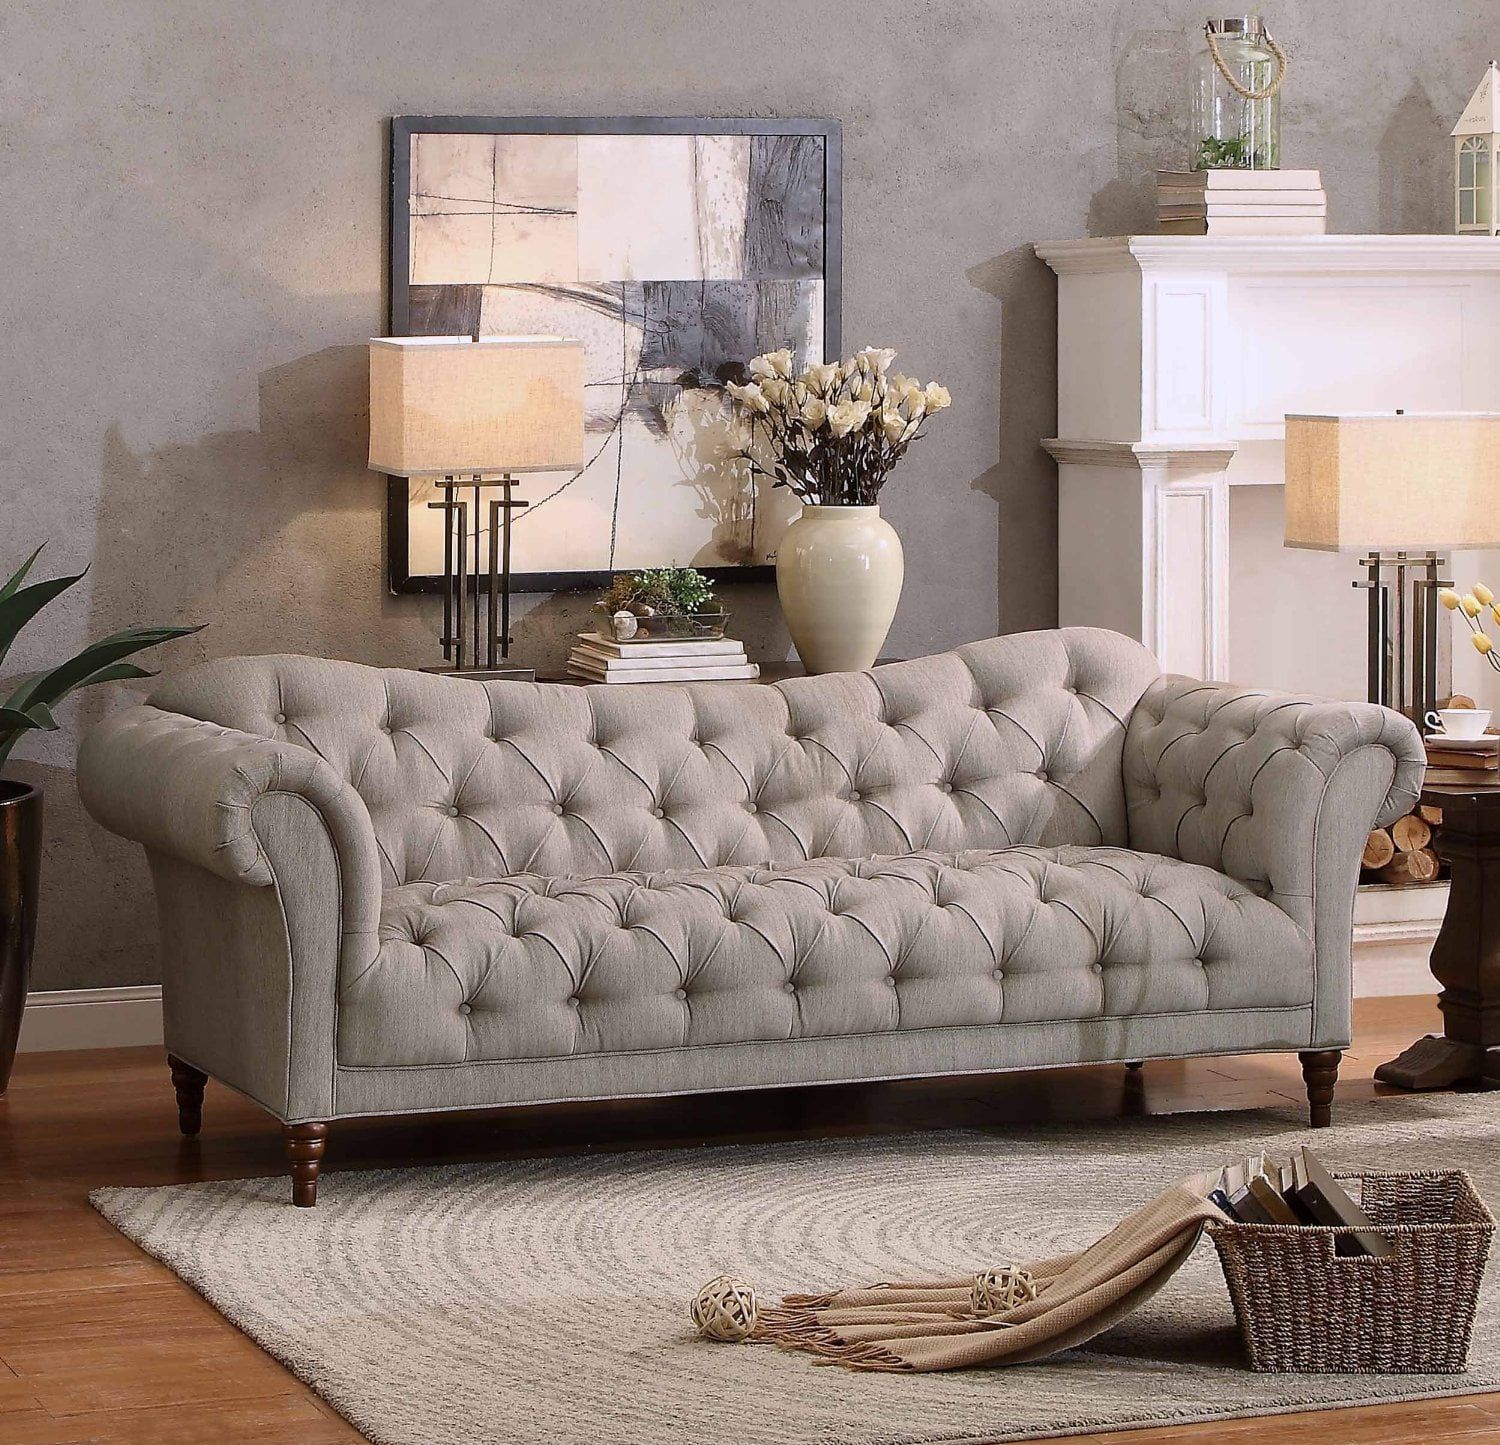 25 Best Chesterfield Sofas To Buy In 2016 With Regard To Chesterfield Sofas (Gallery 2 of 21)